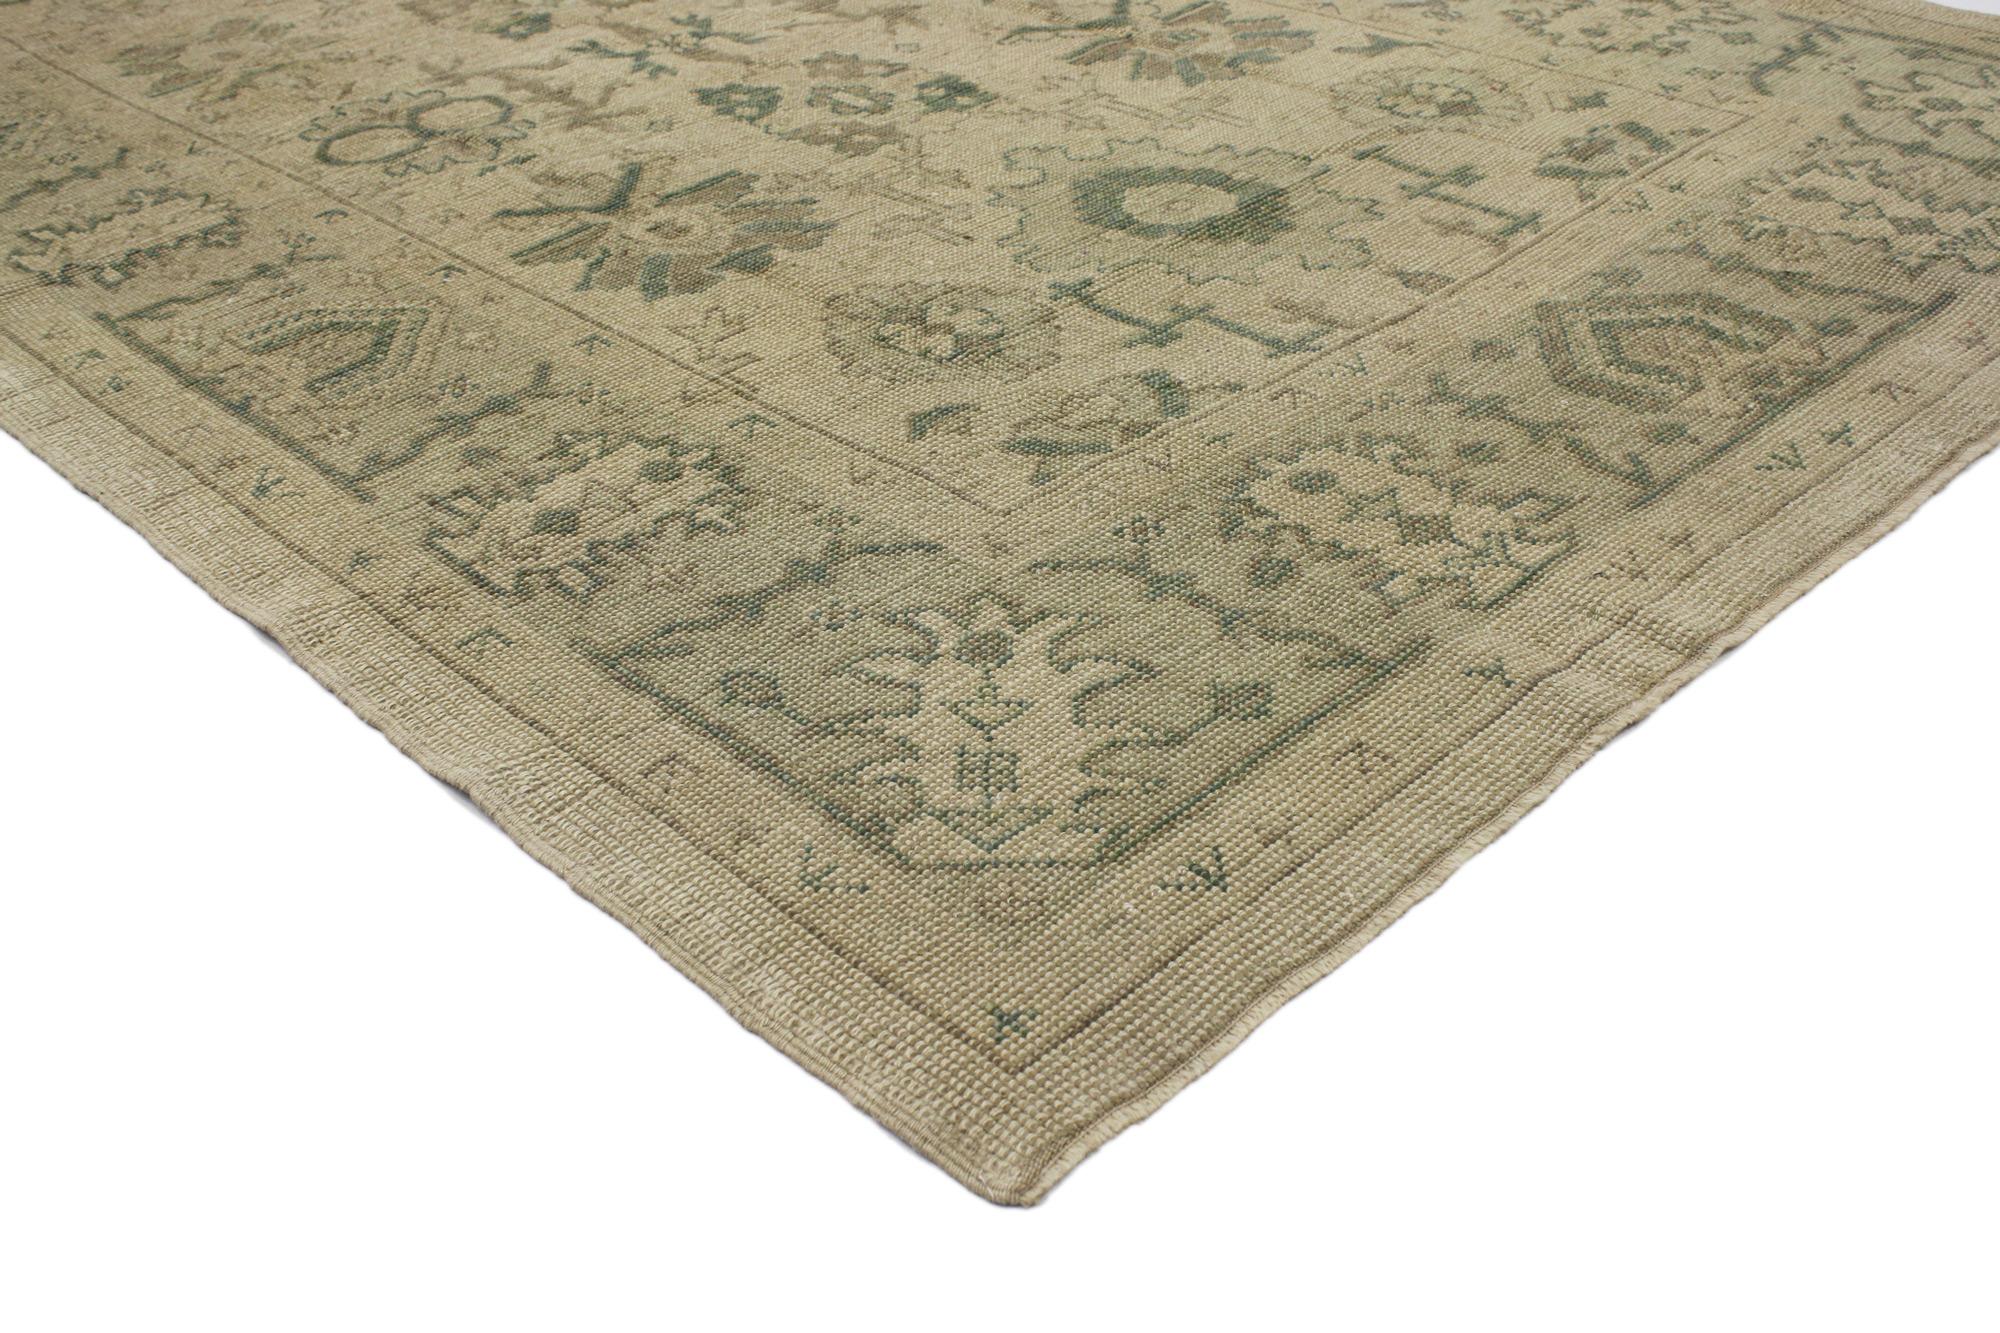 51632 New Vintage-Inspired Turkish Oushak Rug with Earth-Tone Colors, 05’07 x 09’00. Emanating timeless style with incredible detail and texture, this hand knotted wool vintage style Turkish Oushak rug is a captivating vision of woven beauty. The